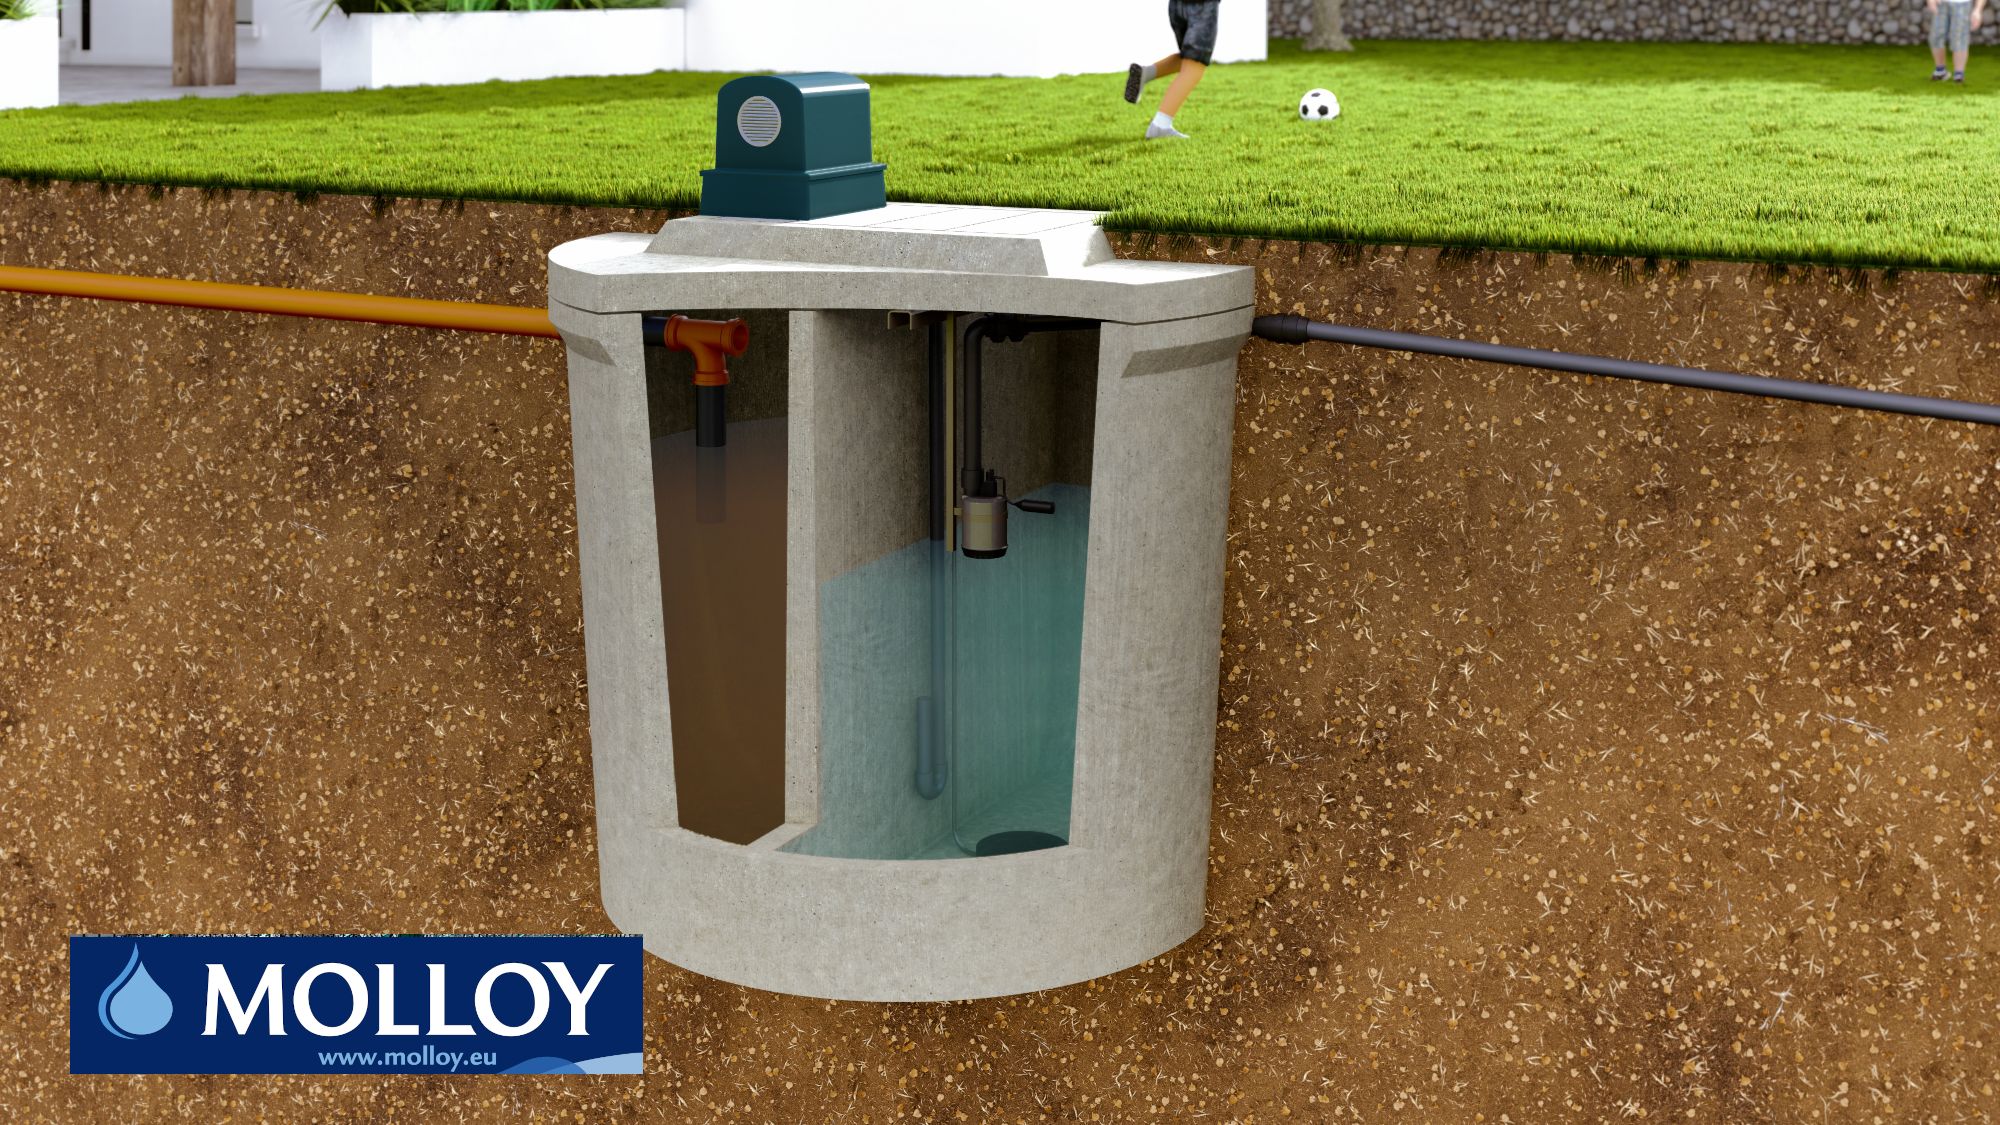 Molloy Domestic Septic System